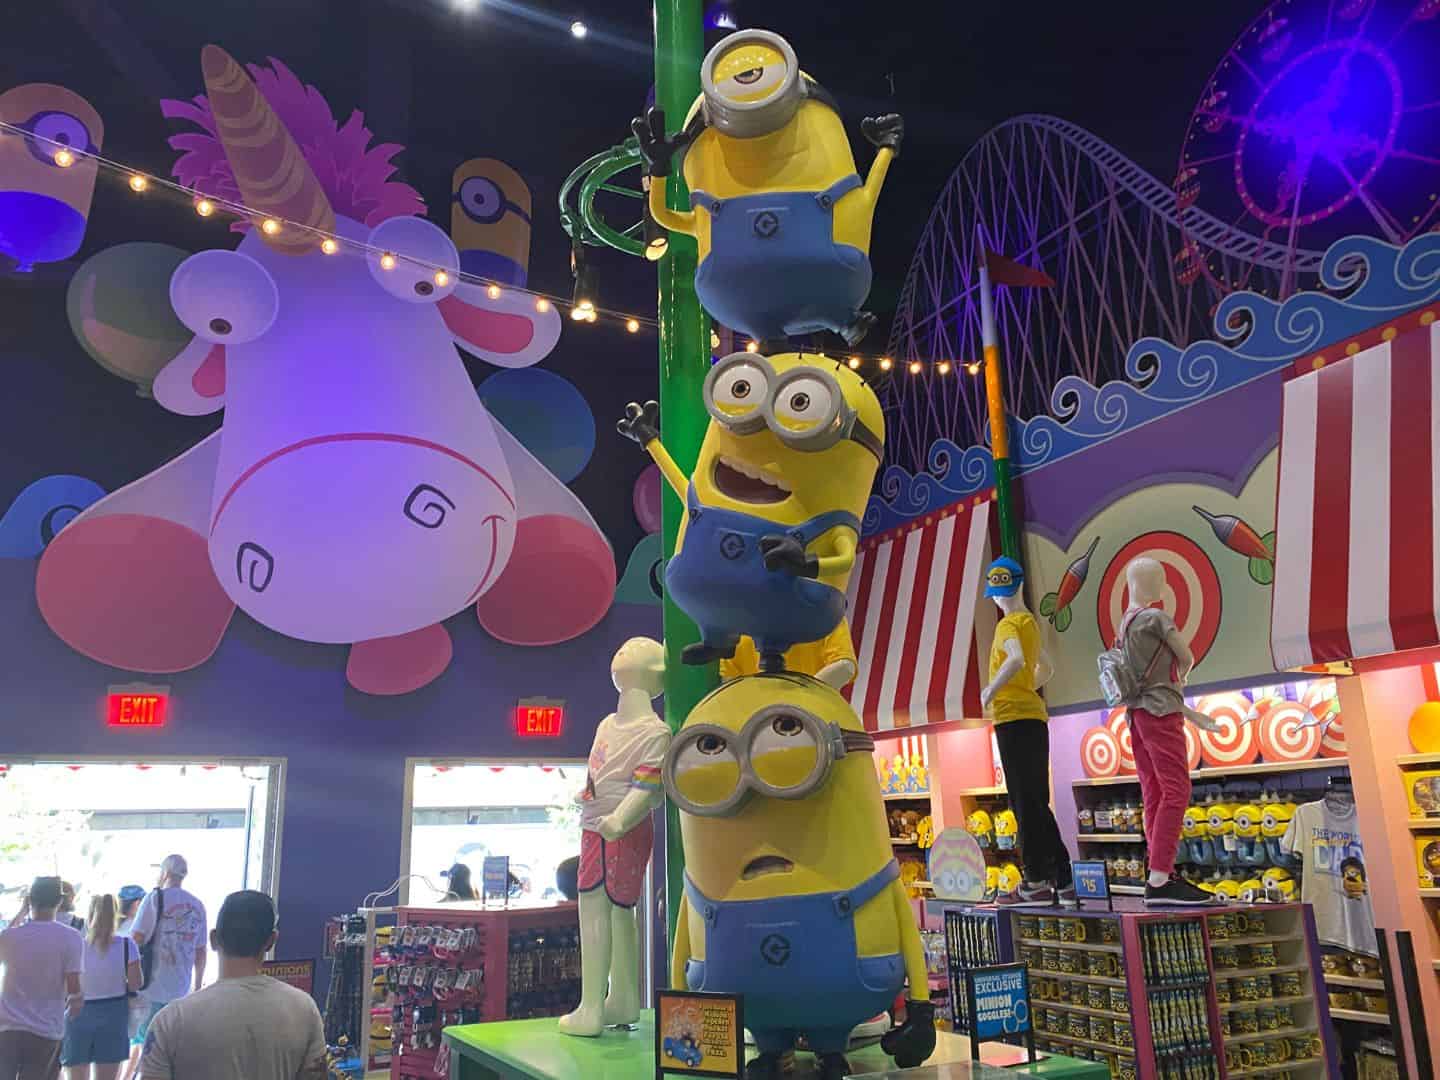 Super Silly Stuff Store with Minions Merchandise and minions props